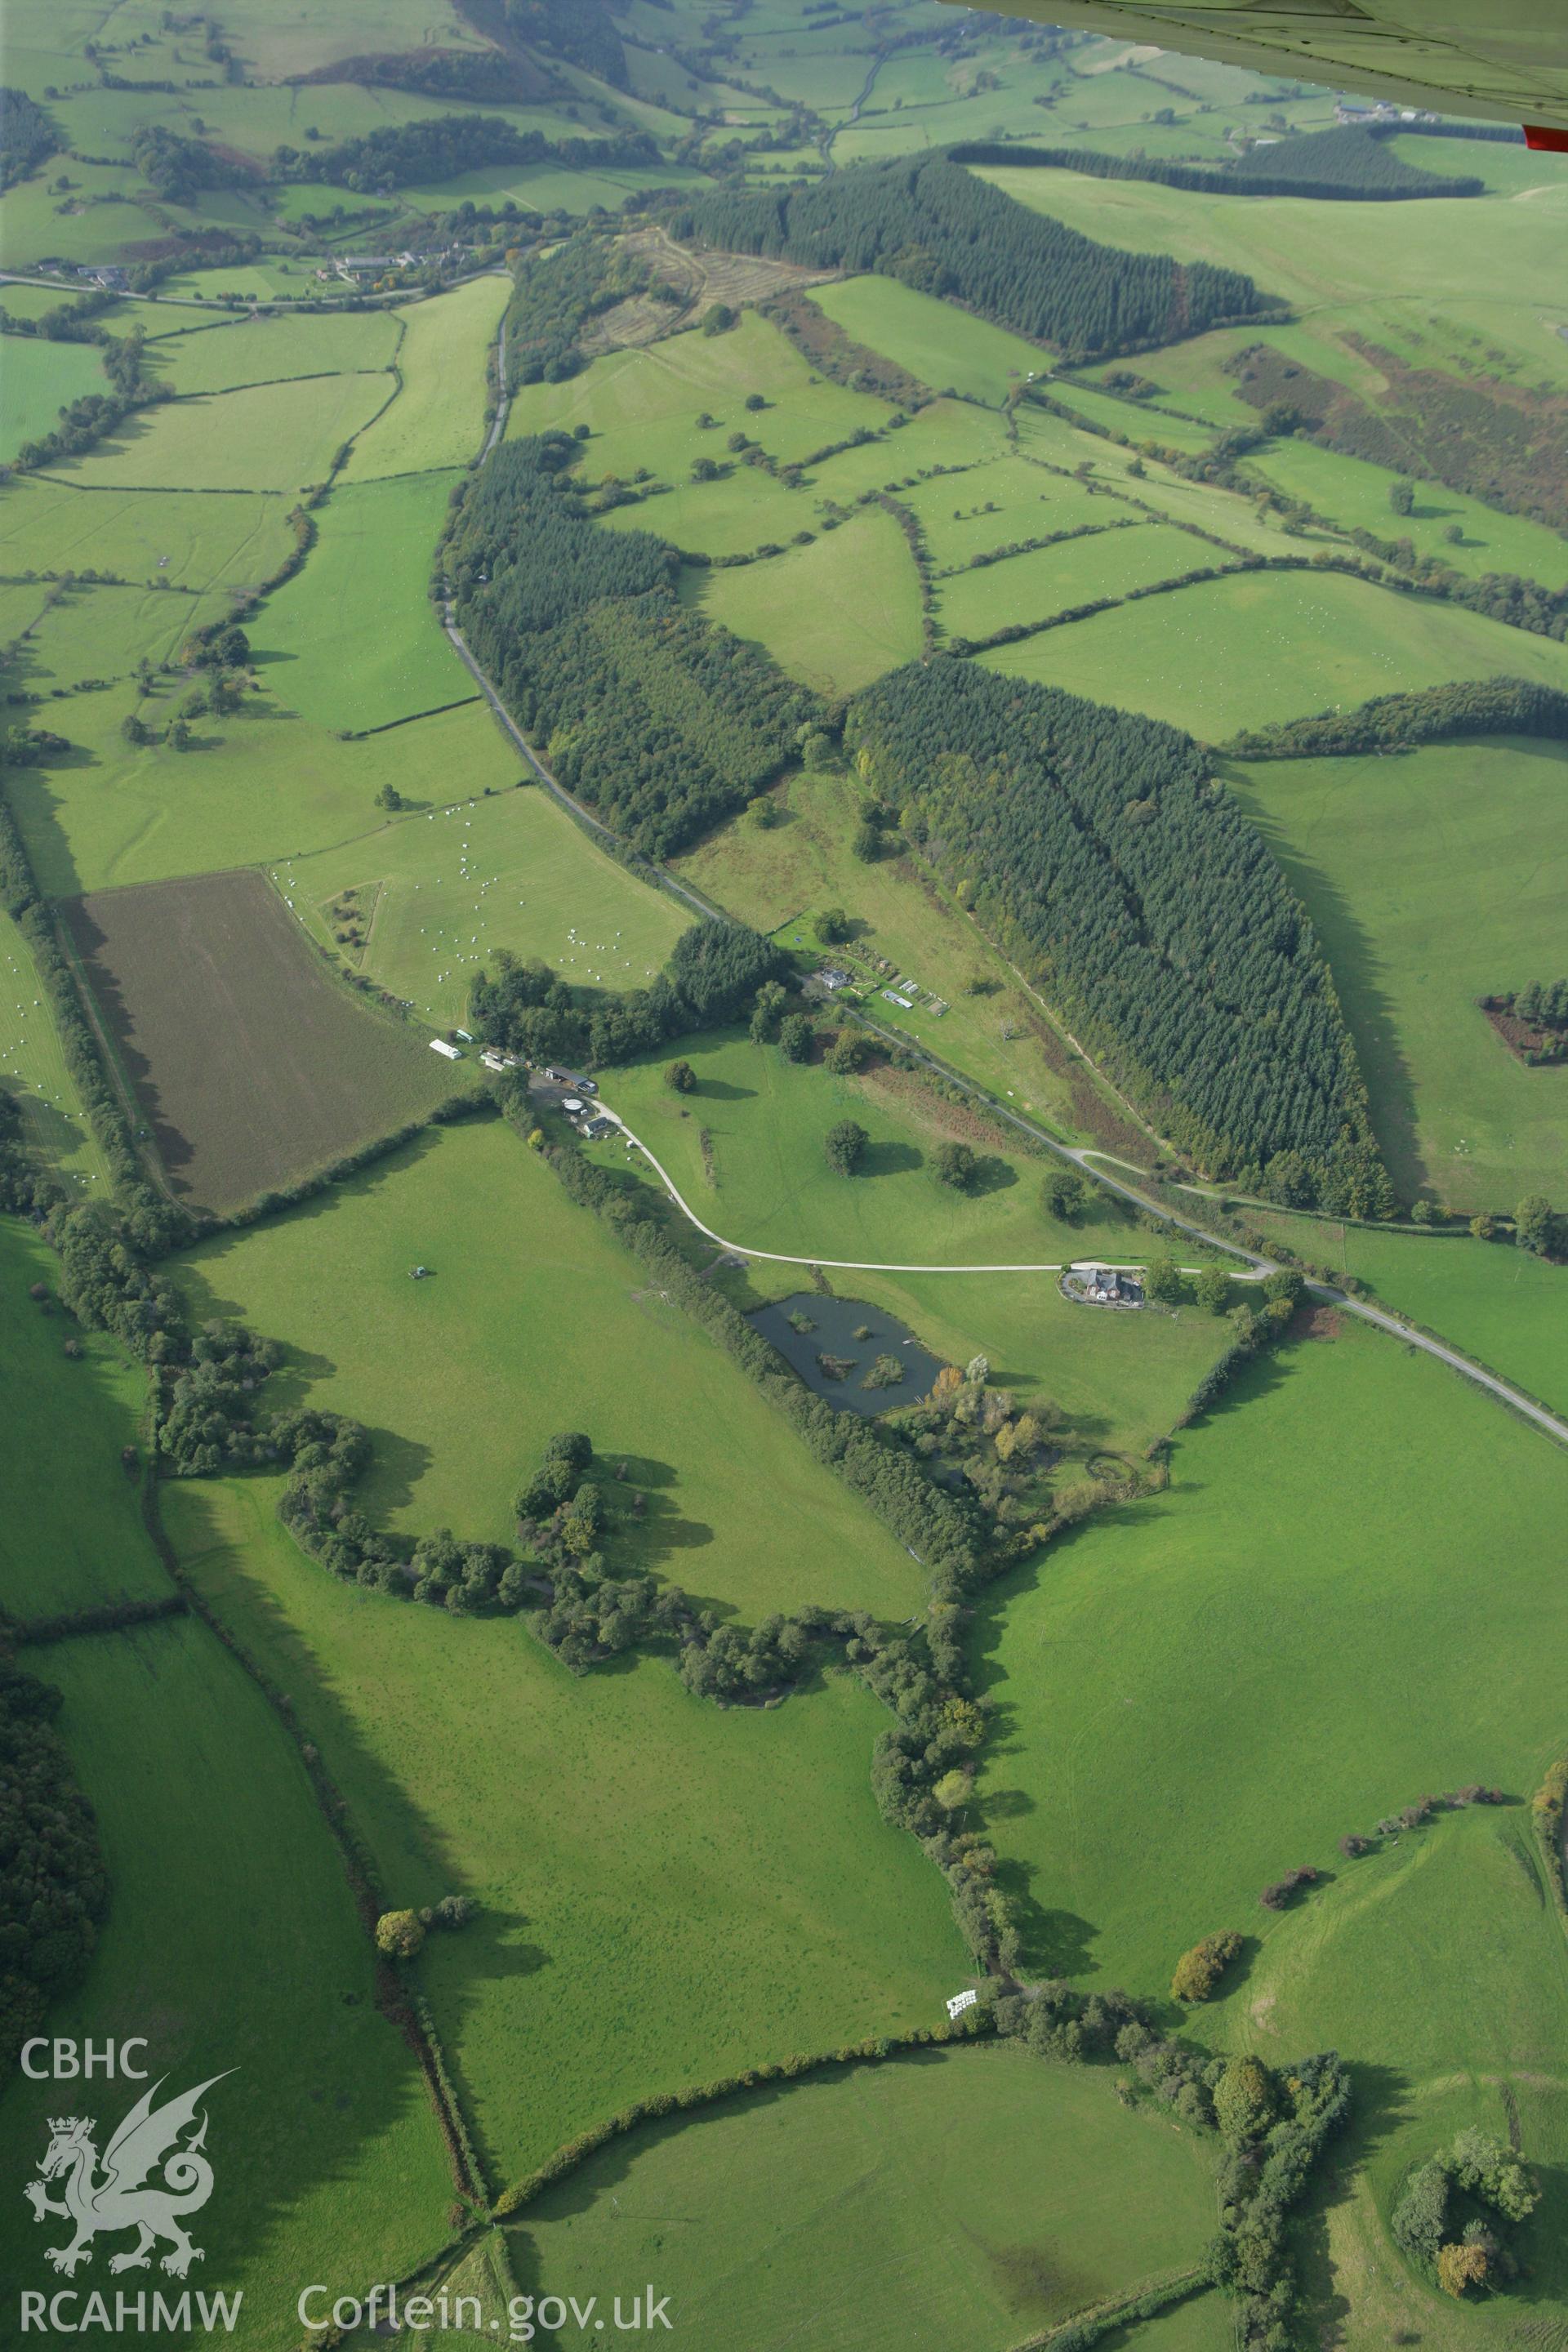 RCAHMW colour oblique photograph of the site of the battle of Pilleth. Taken by Toby Driver on 10/10/2008.